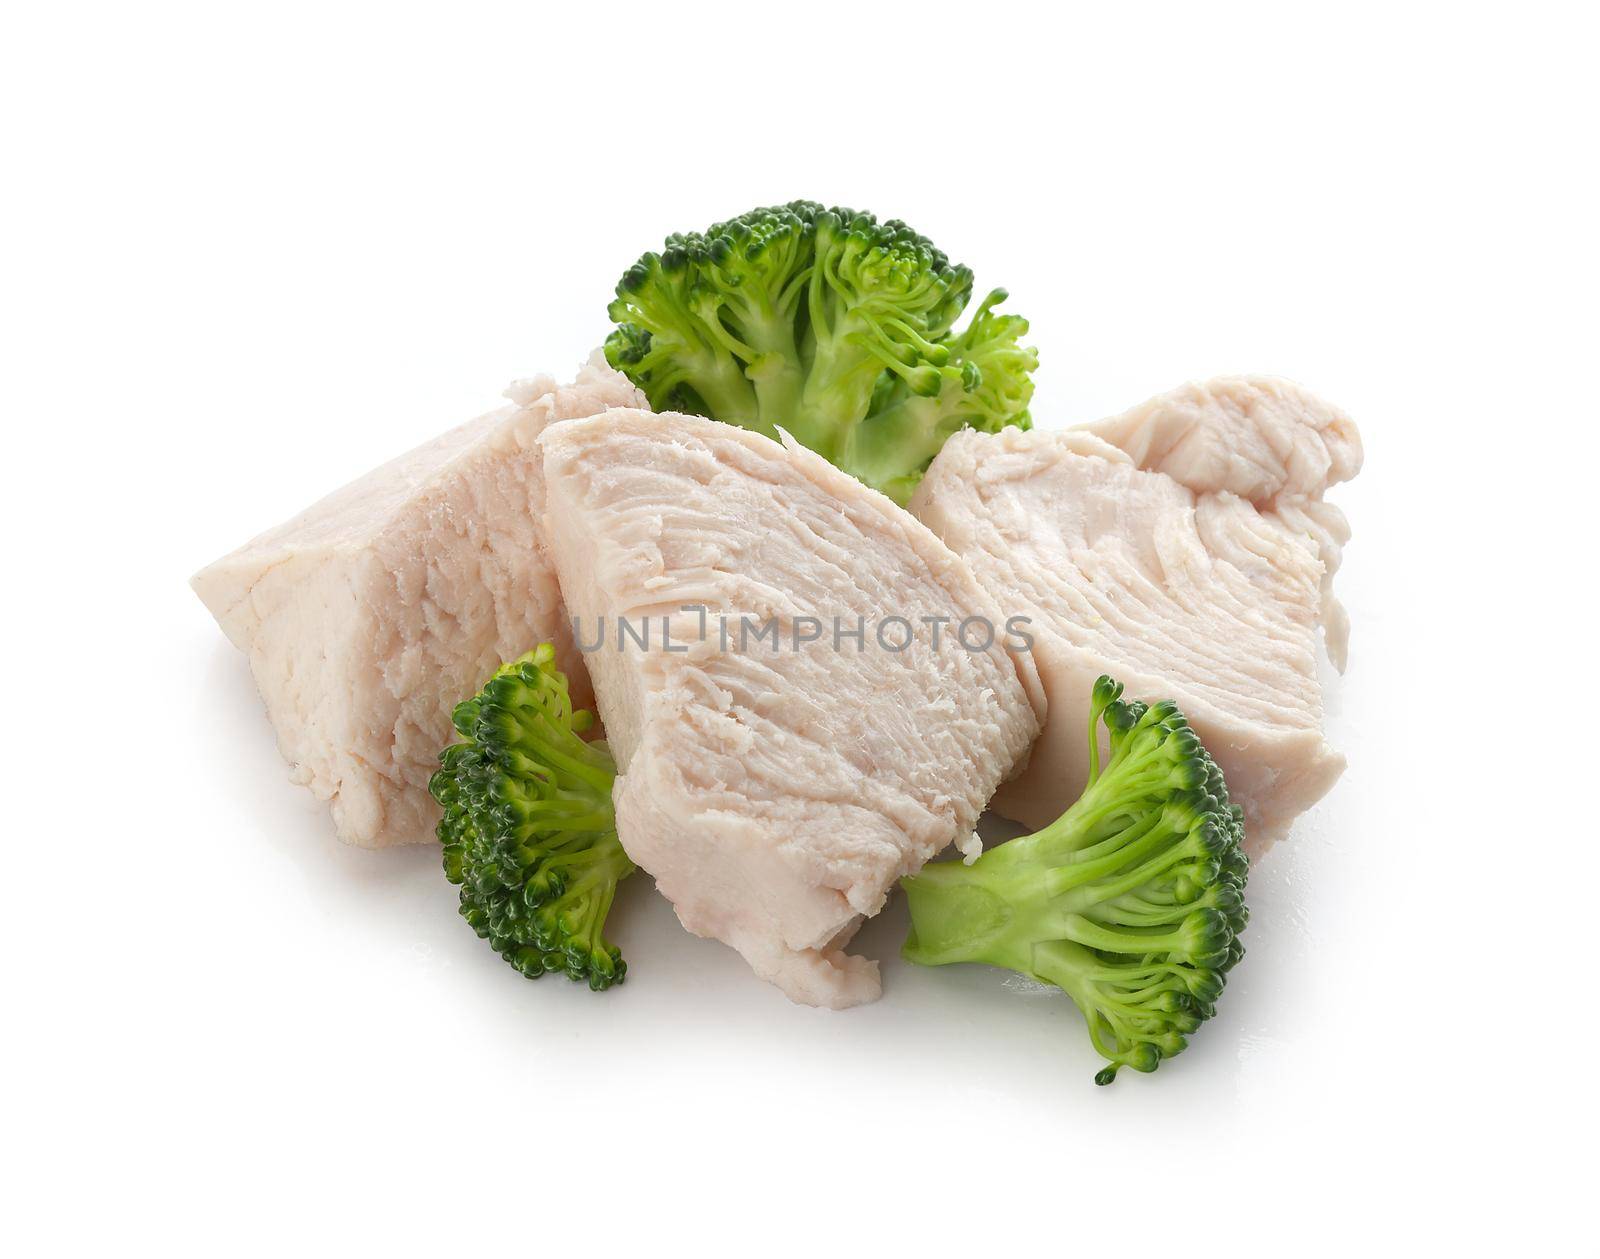 Isolated handfull of prepared chicken pieces with fresh green broccoli